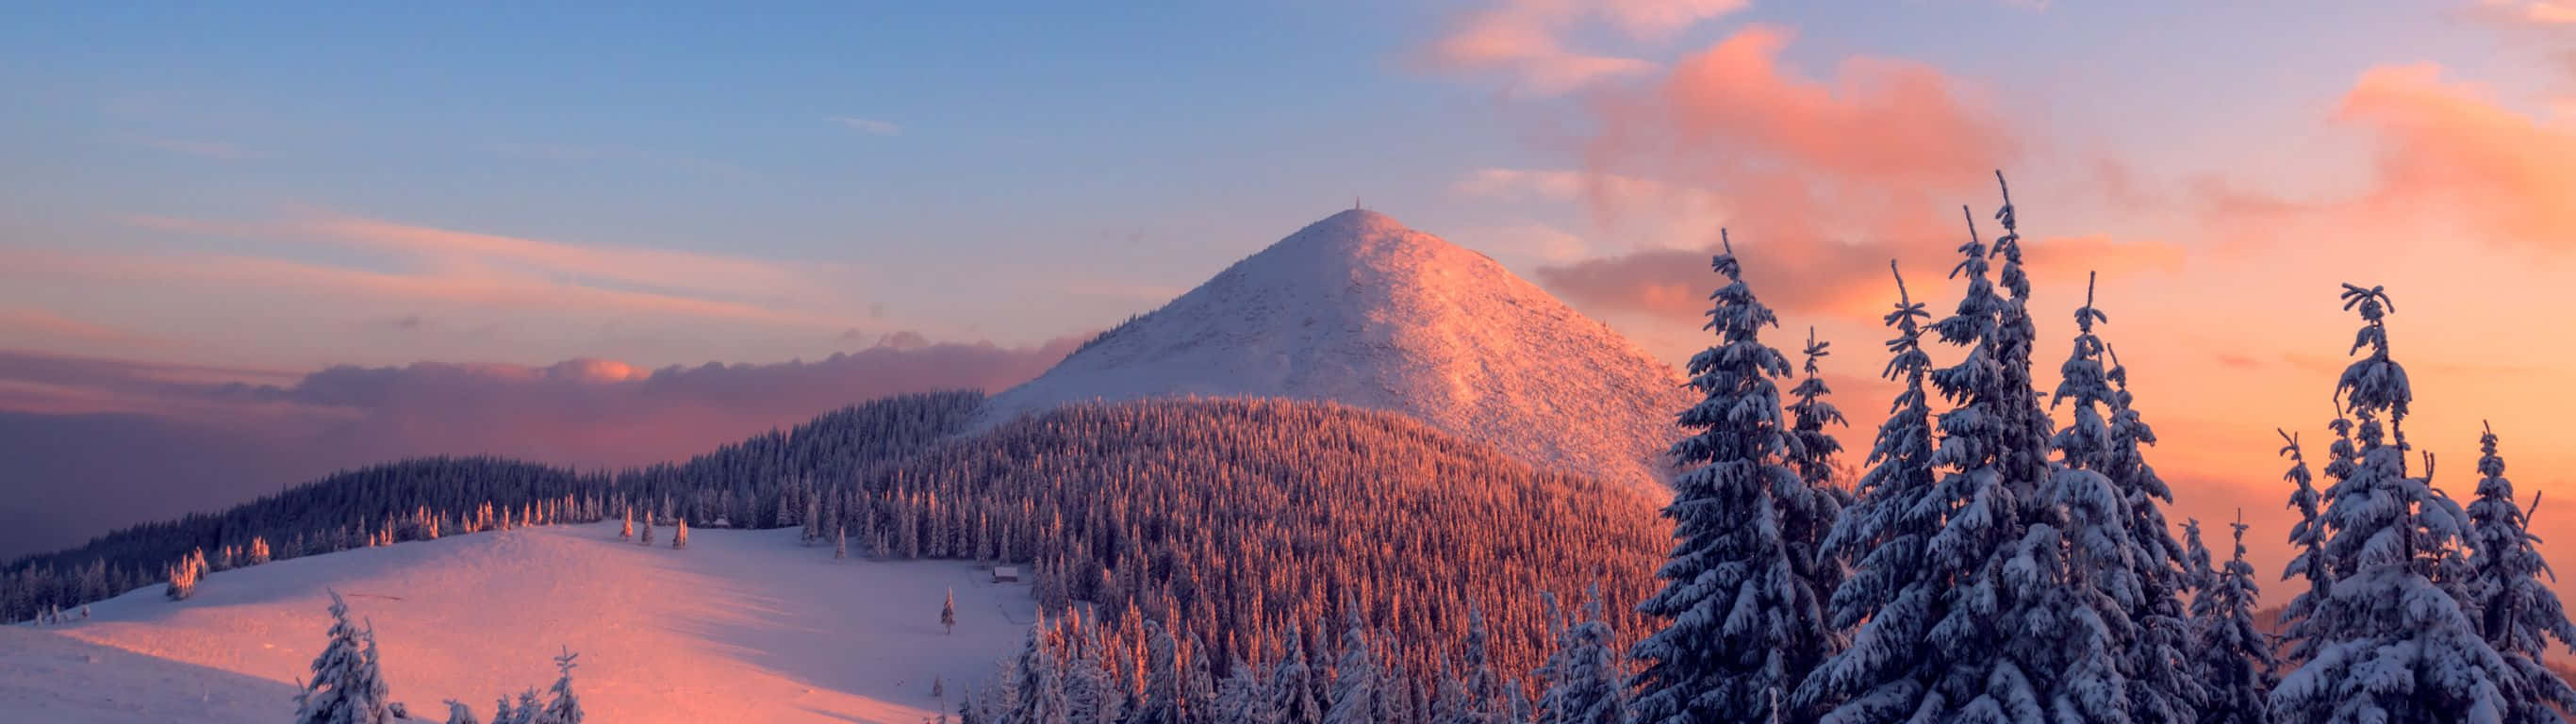 A Mountain With Snow Covered Trees And A Sunset Wallpaper